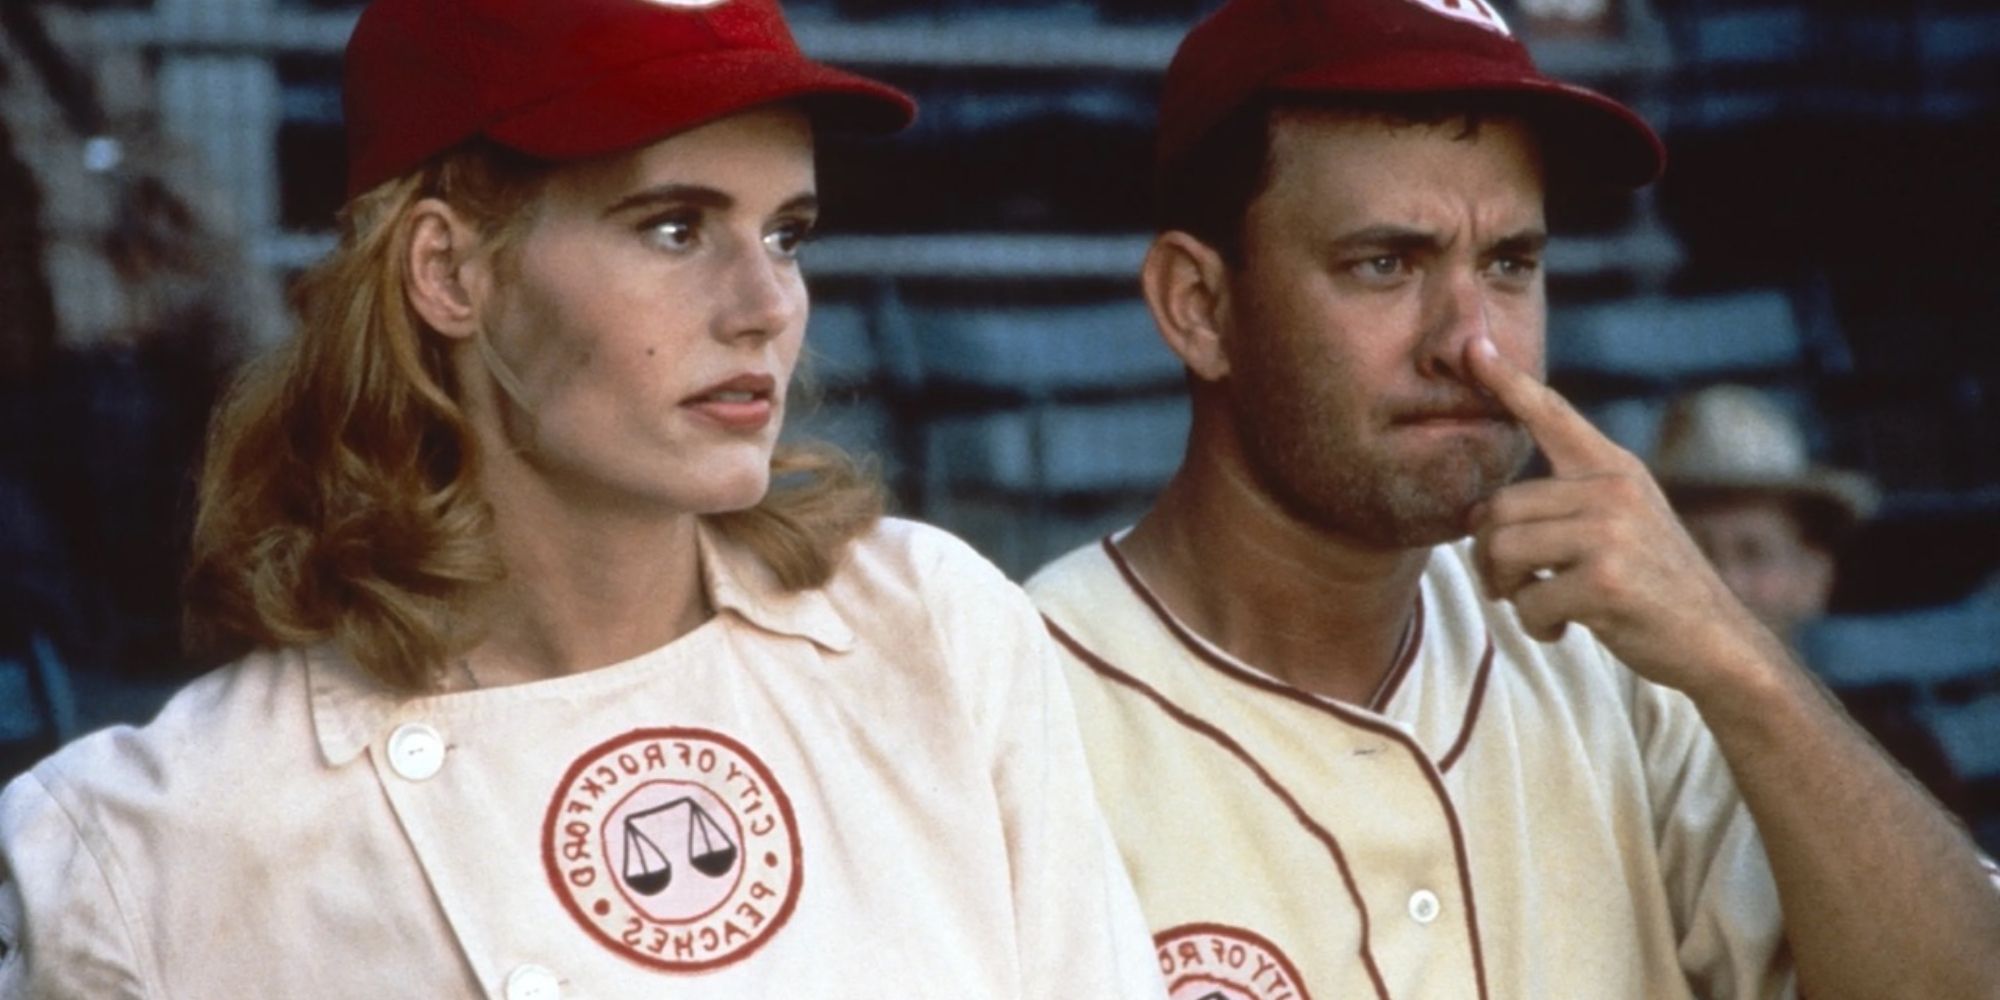 Geena Davis and Tom Hanks stand in the dugout during a scene from the film A League of Their Own